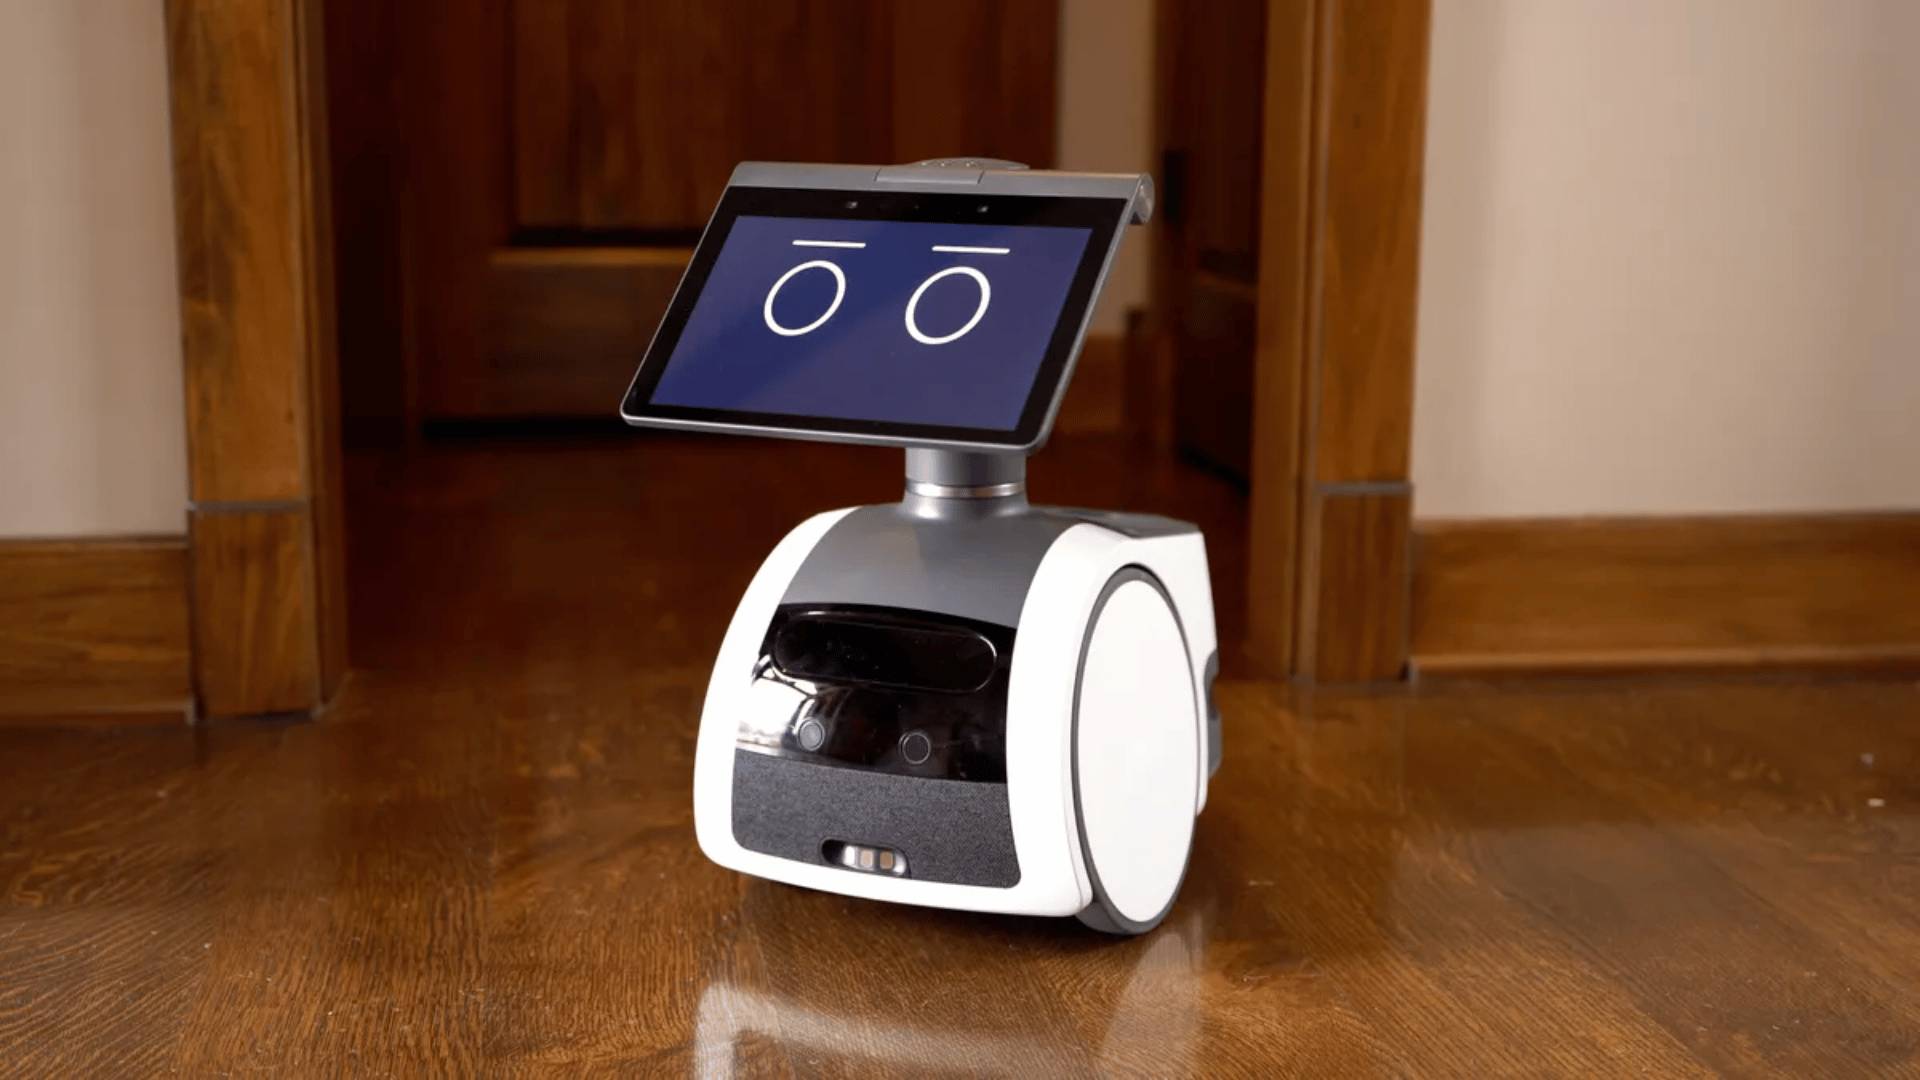   Astro, Household robot for home monitoring